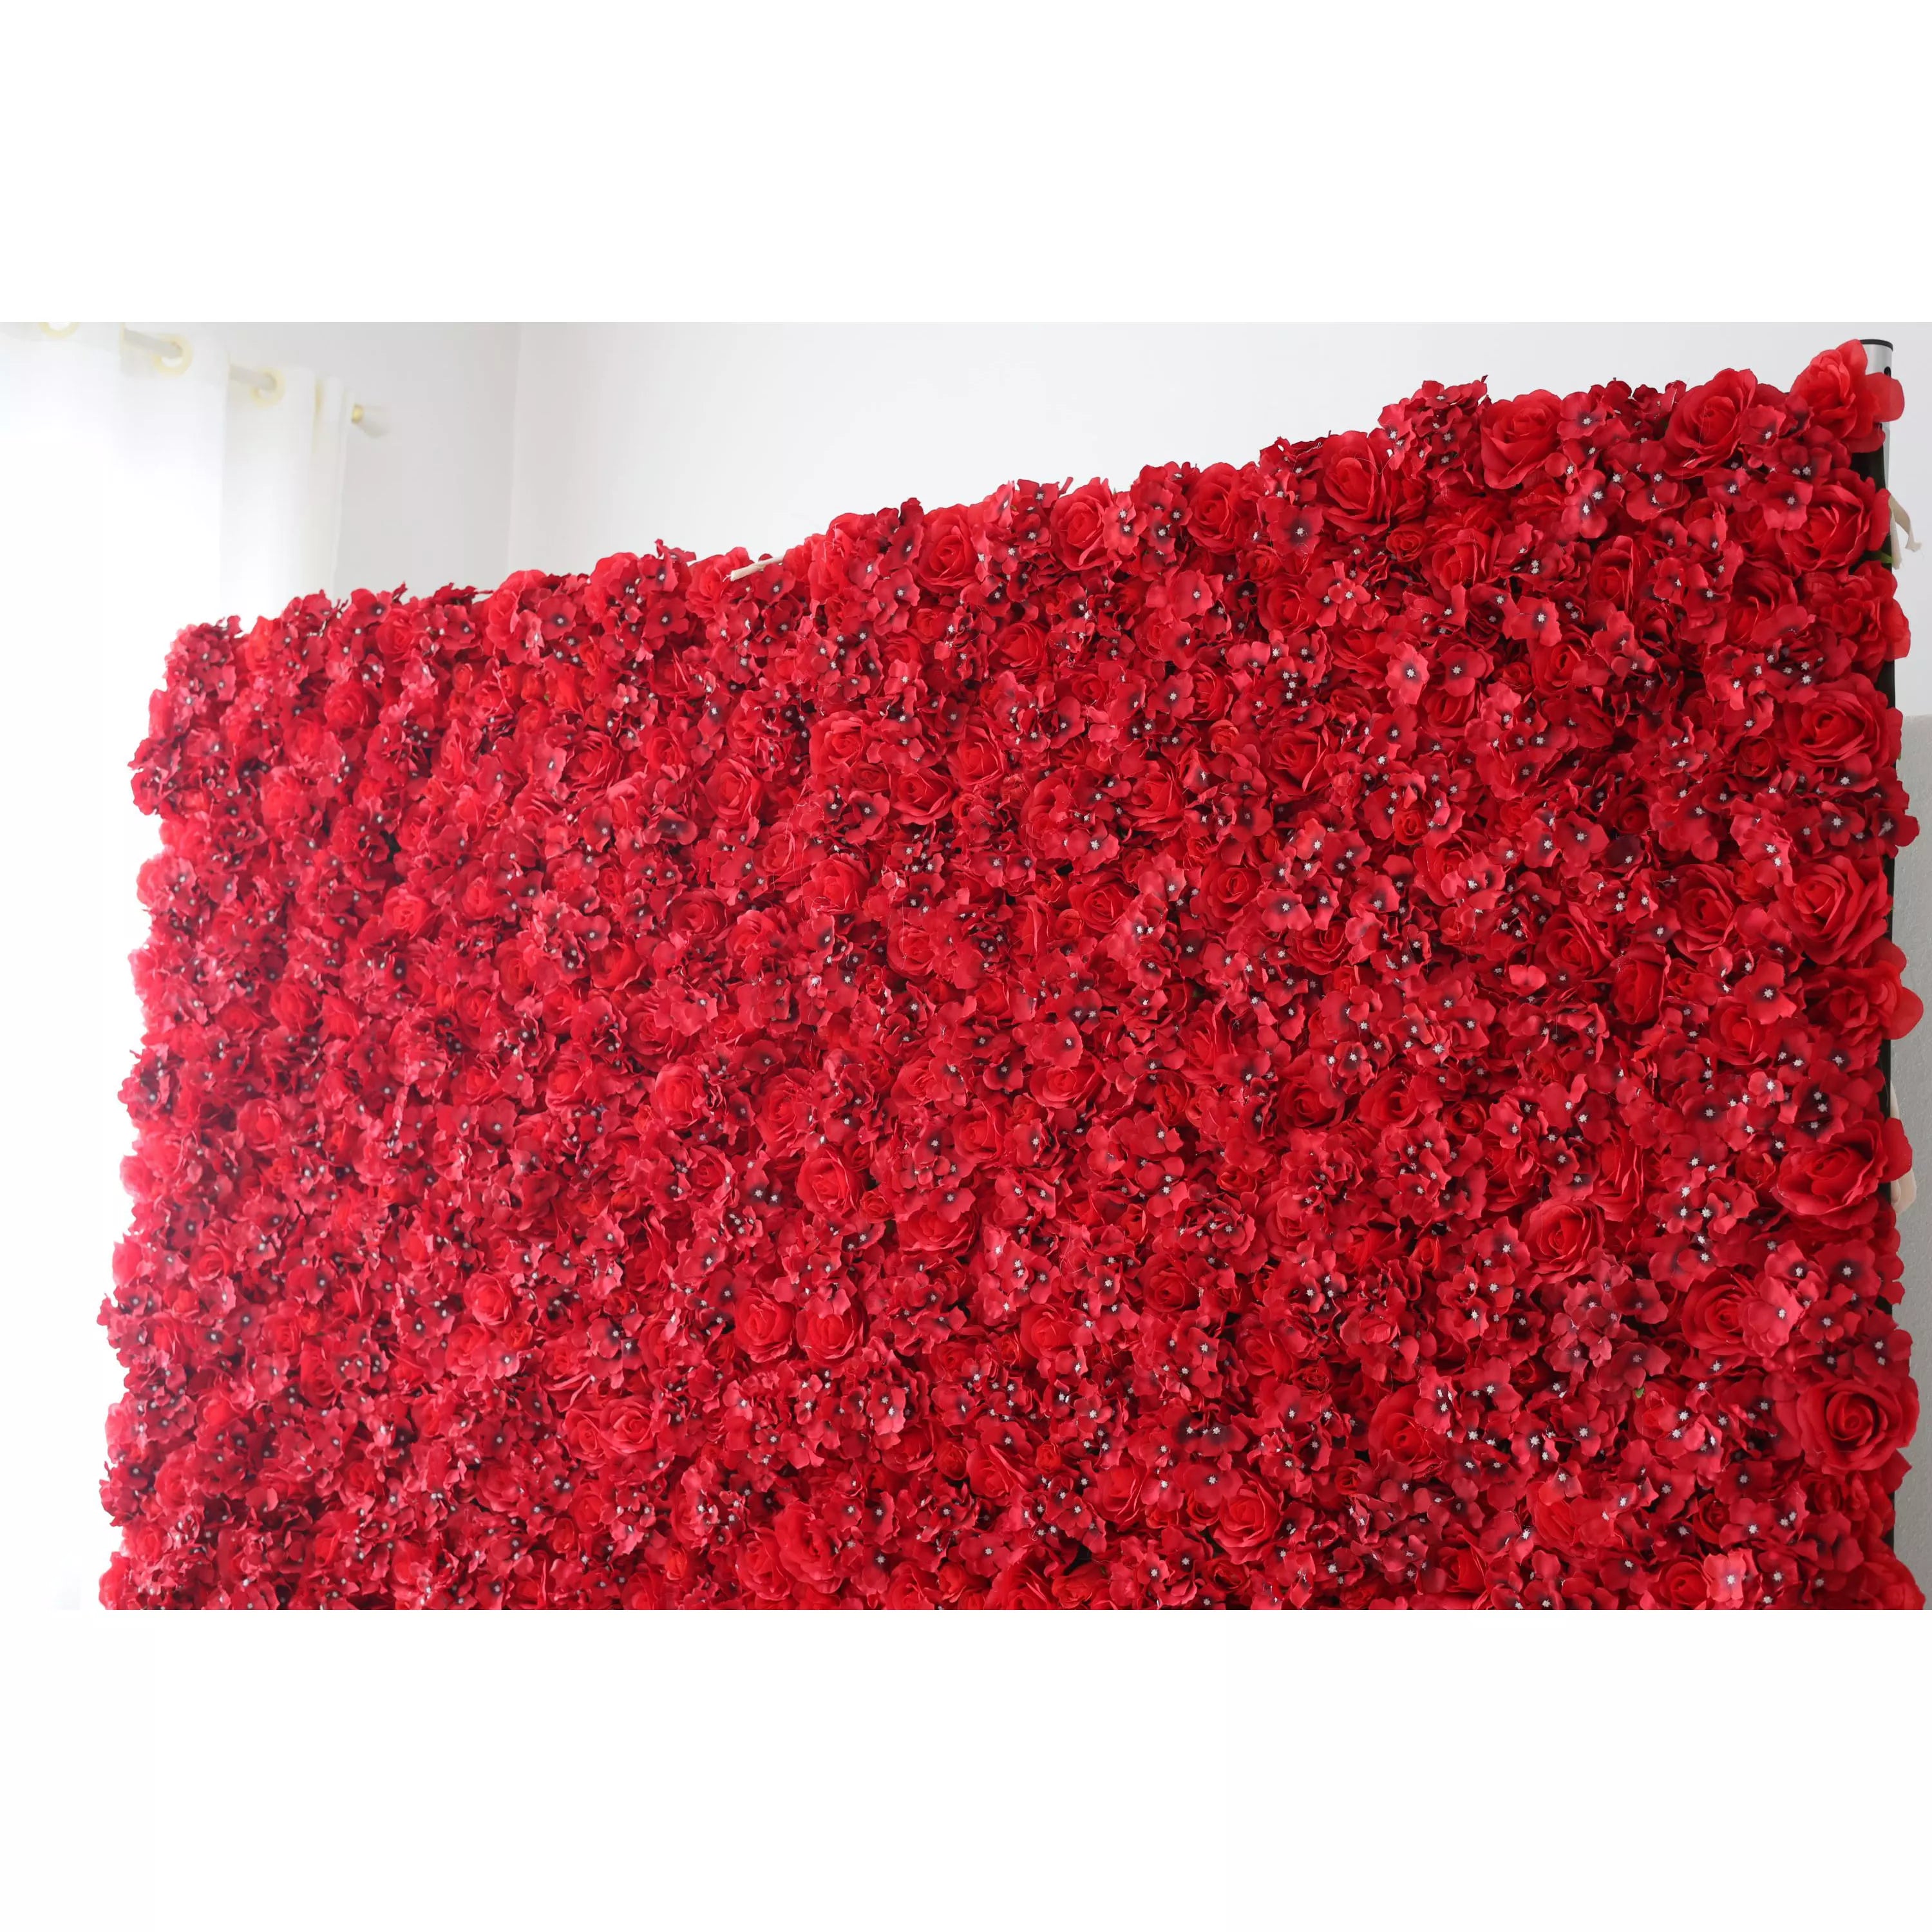 Valar Flowers Roll Up Artificial Flower Wall Backdrop in Radiant Red Rhapsody for Passionate Gatherings and Intimate Affairs - VF-2322